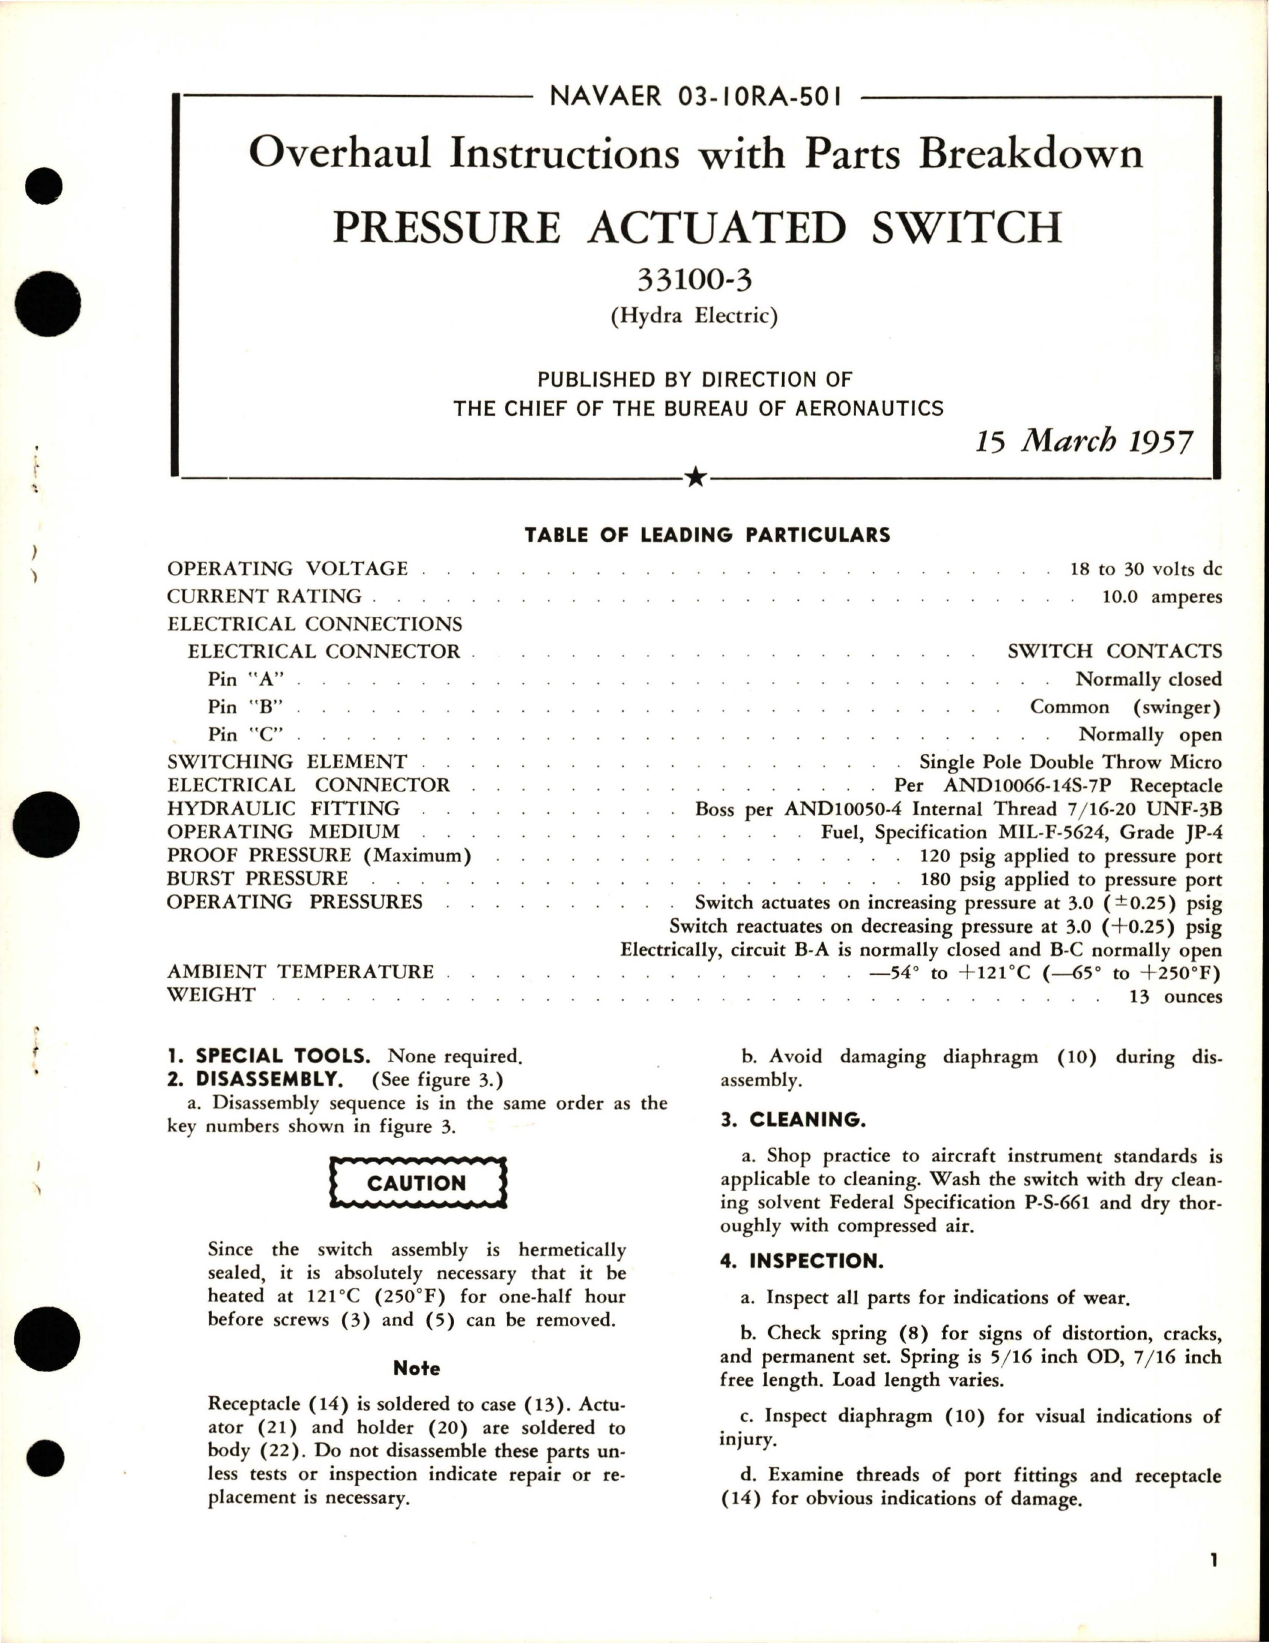 Sample page 1 from AirCorps Library document: Overhaul Instructions with Parts Breakdown for Pressure Actuated Switch - 33100-3